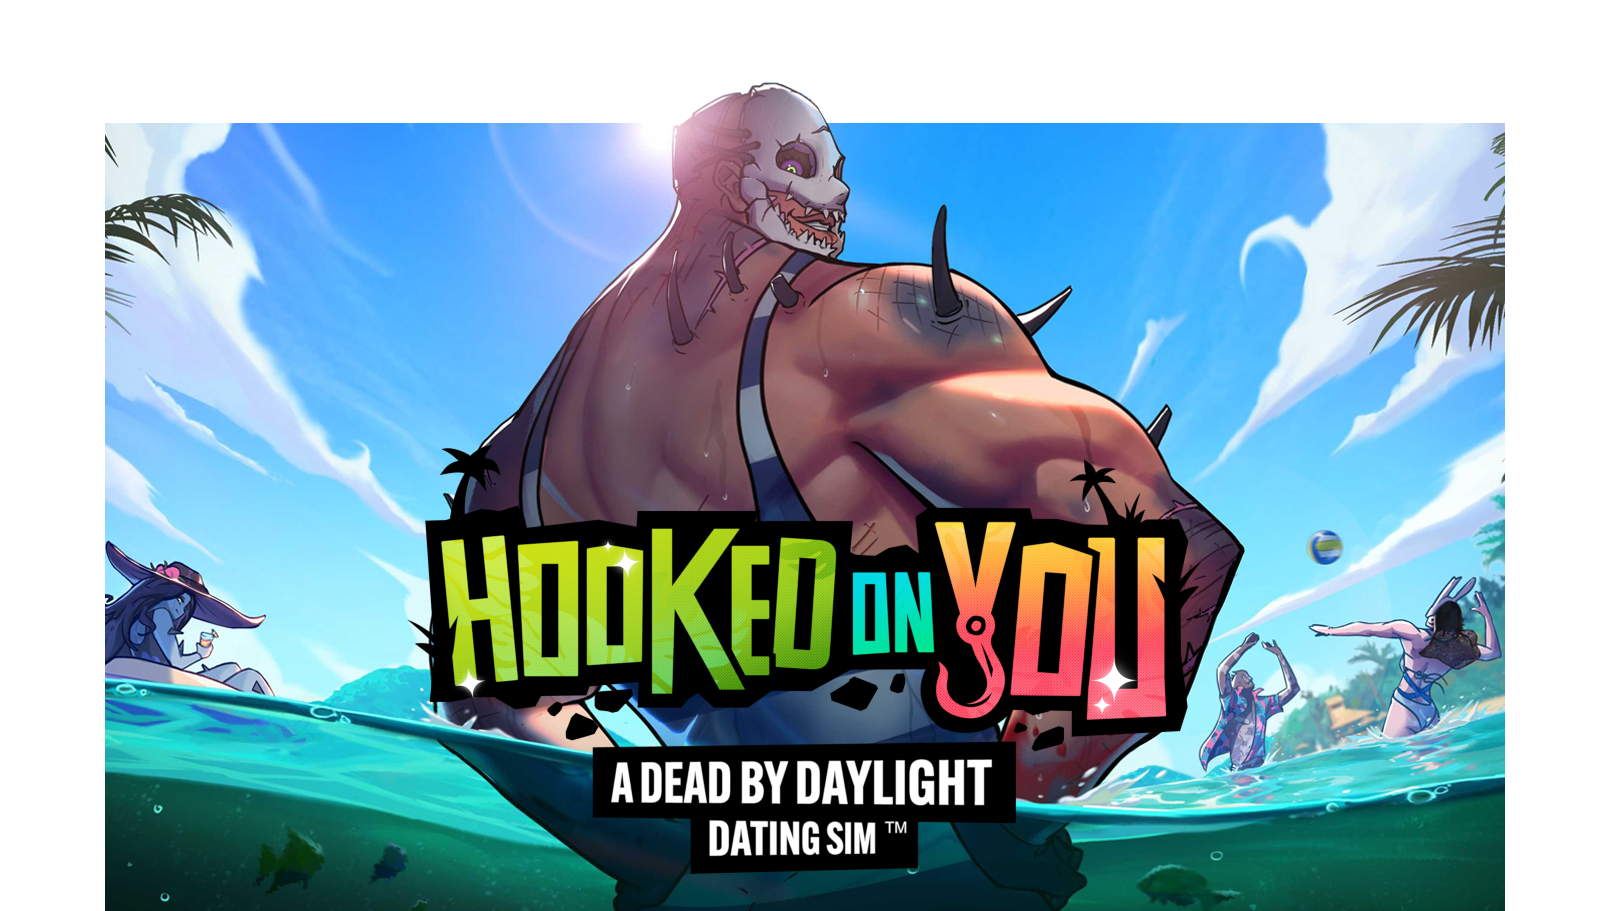 A Dead by Daylight Dating Sim